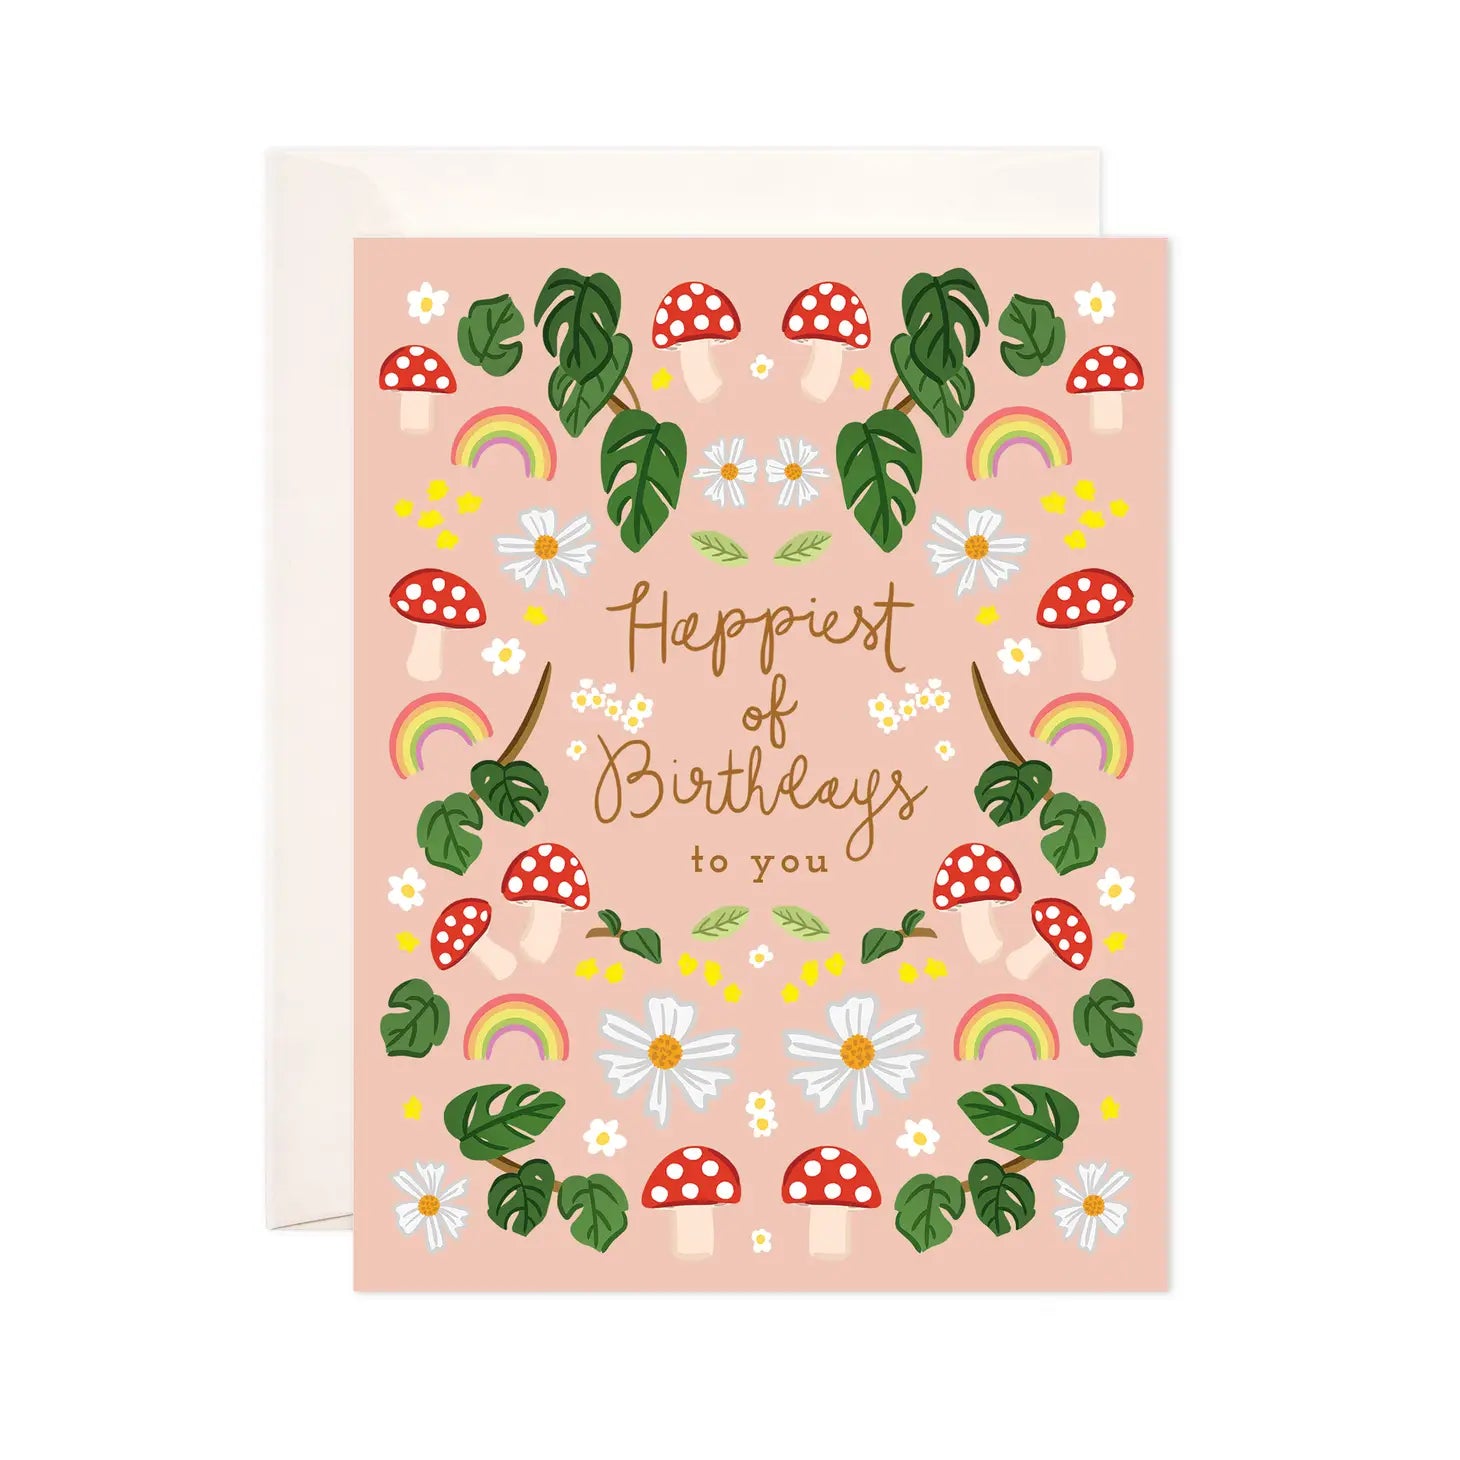 White card with light brown background. Illustrations of leaves, mushrooms, rainbows, and flowers. Brown text reads "happiest of birthdays to you" 